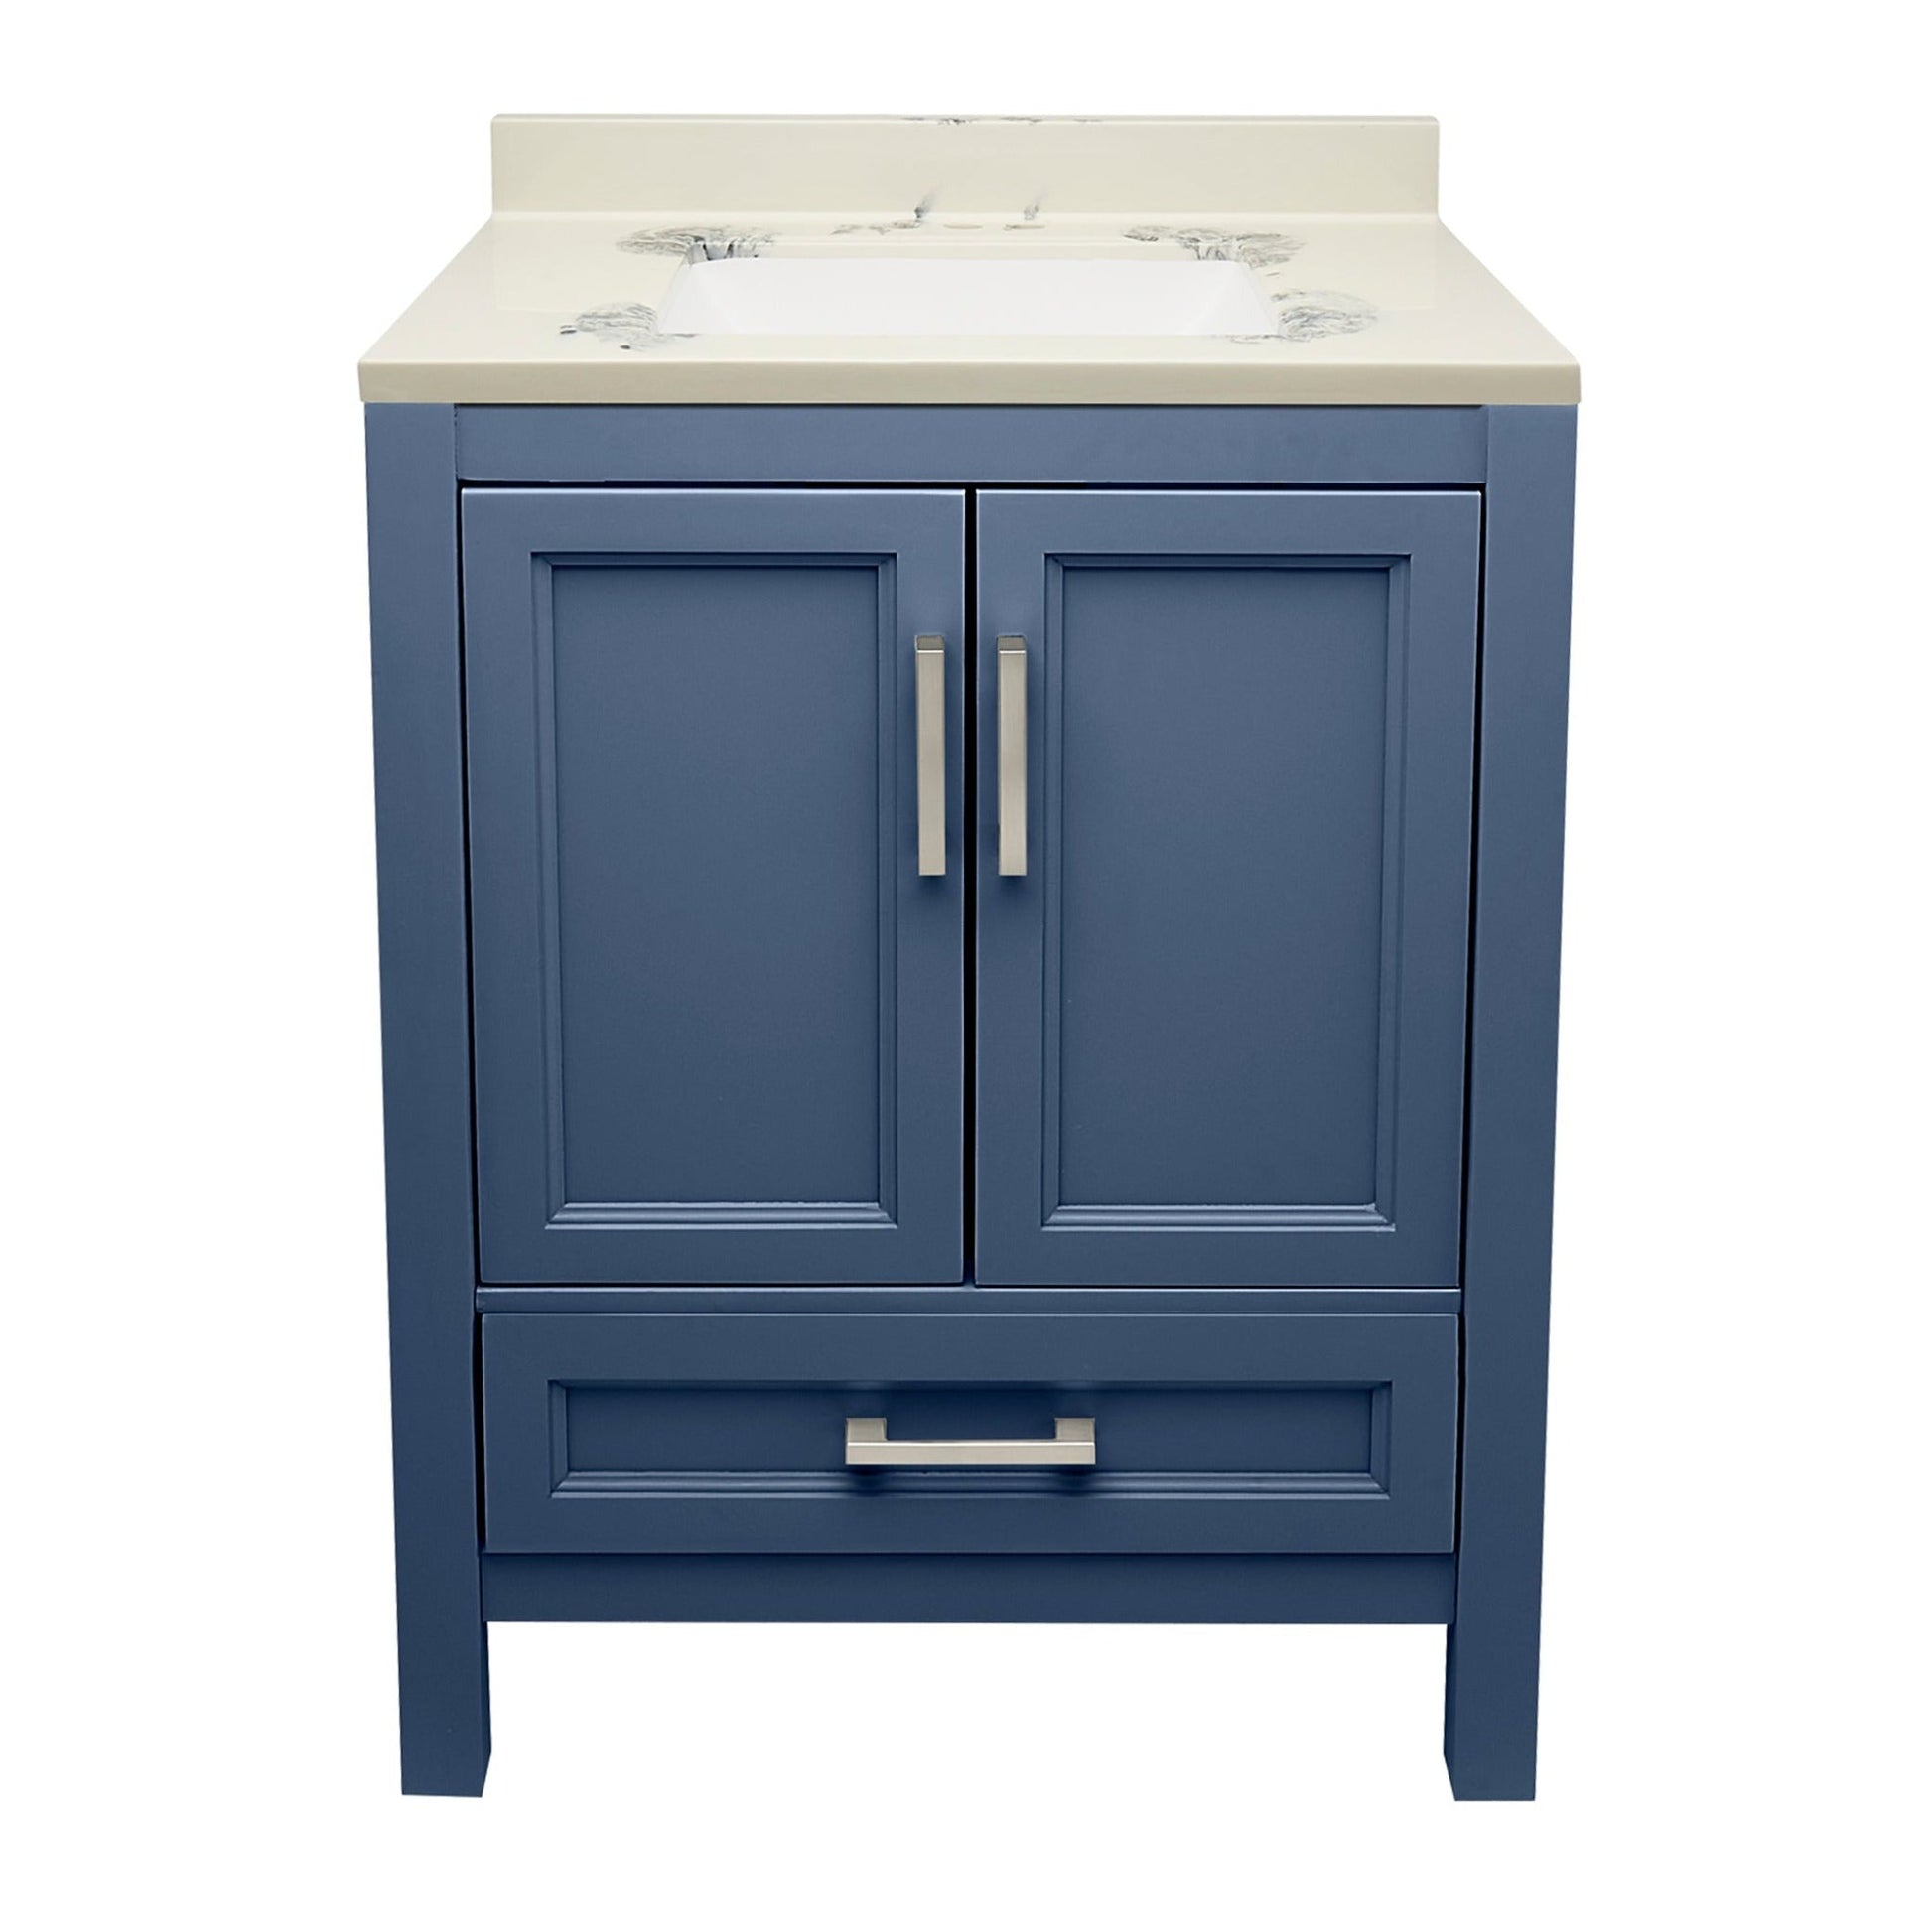 Ella’s Bubbles Nevado 25" Navy Blue Bathroom Vanity With Carrara White Cultured Marble Top With Backsplash and Sink